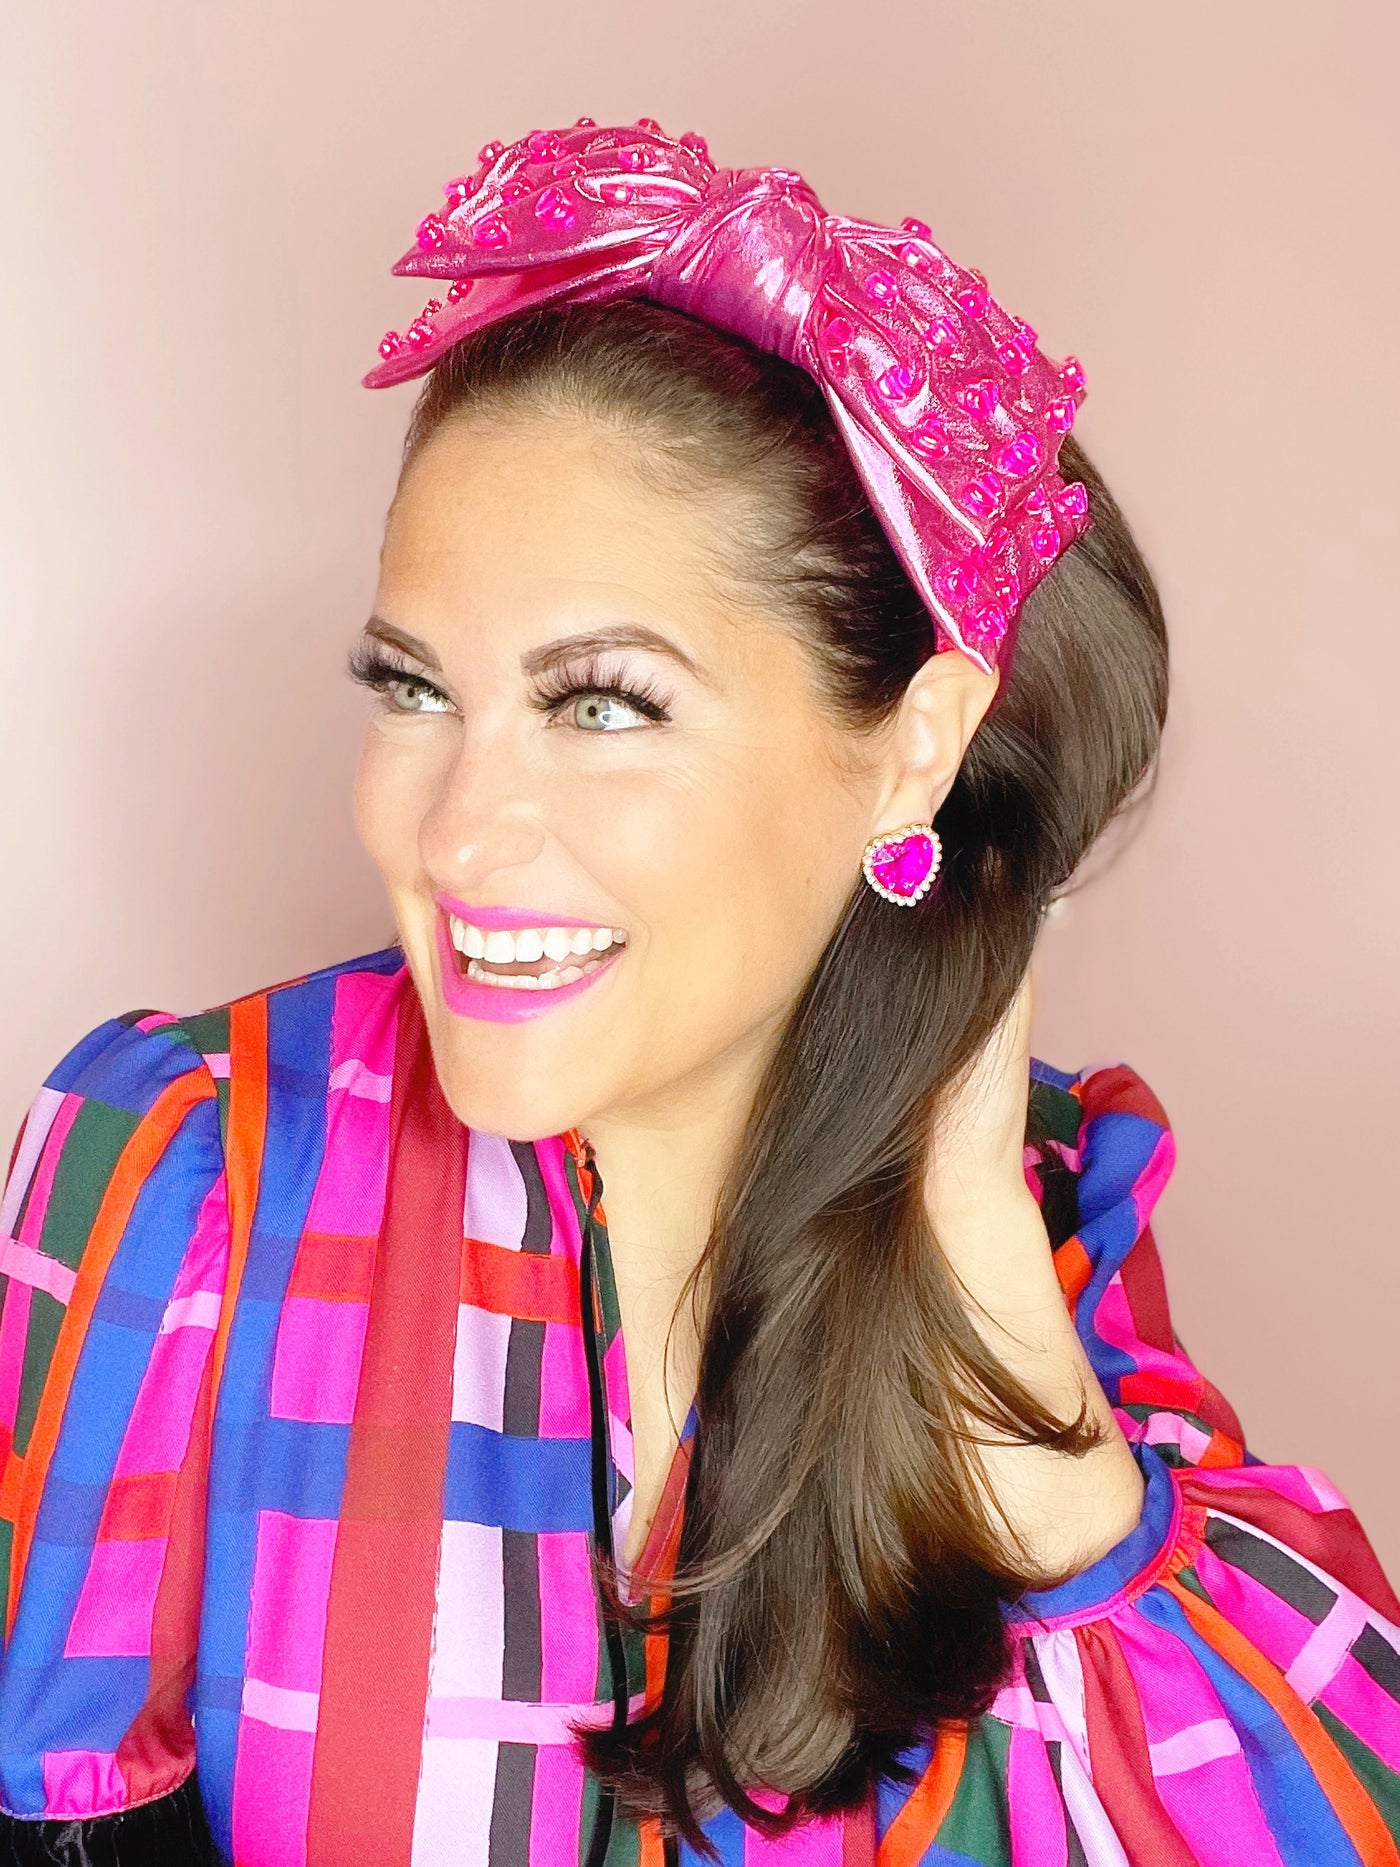 Adult Size Pink Bow Headband with Heart Beads